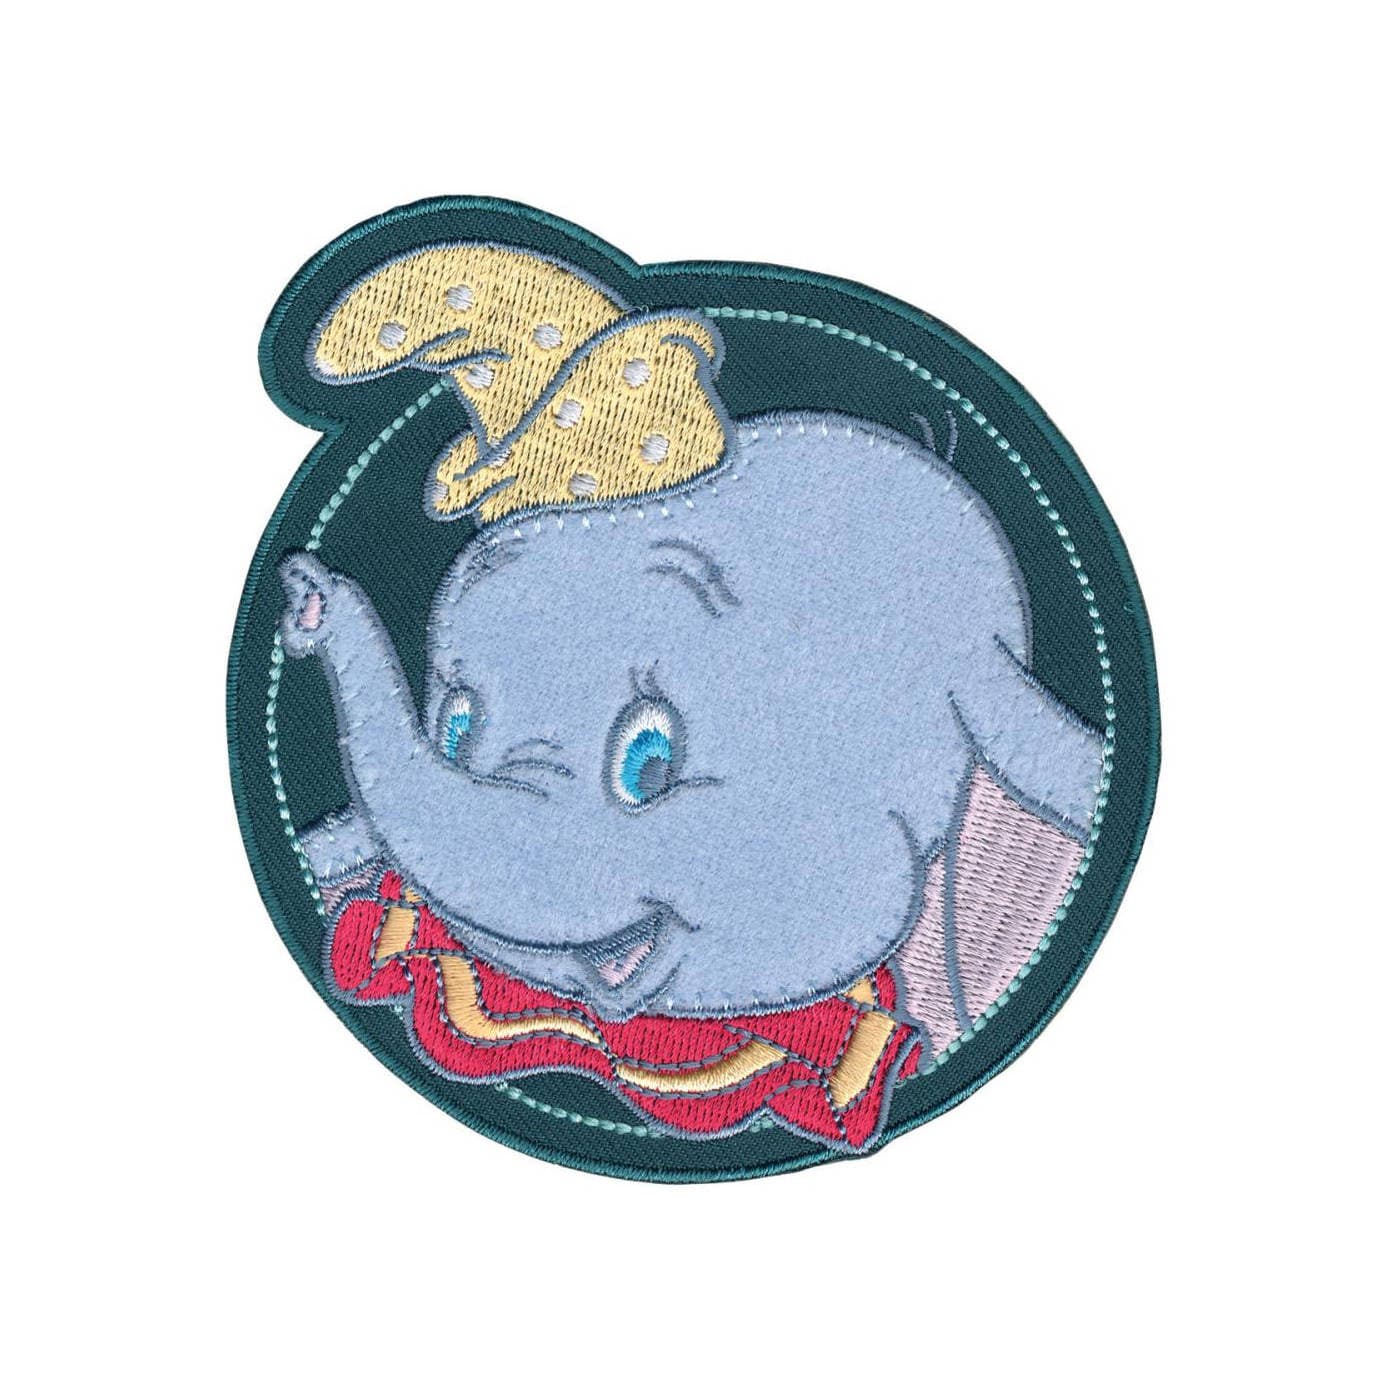 Iron On Applique DISNEY Iron On Patch Dumbo in Circle